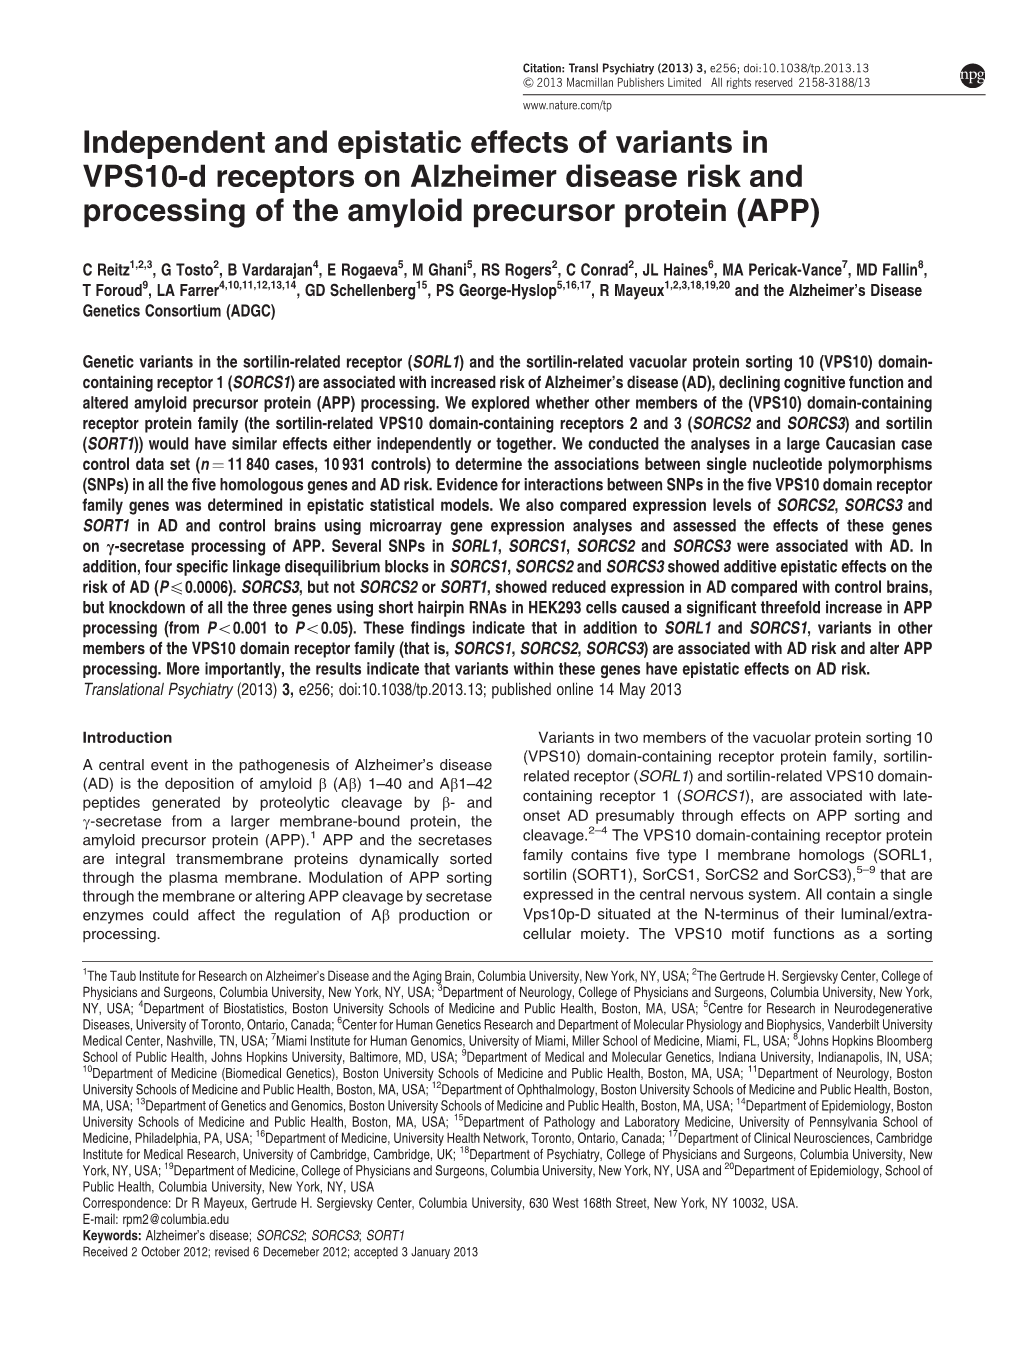 Independent and Epistatic Effects of Variants in VPS10-D Receptors on Alzheimer Disease Risk and Processing of the Amyloid Precursor Protein (APP)